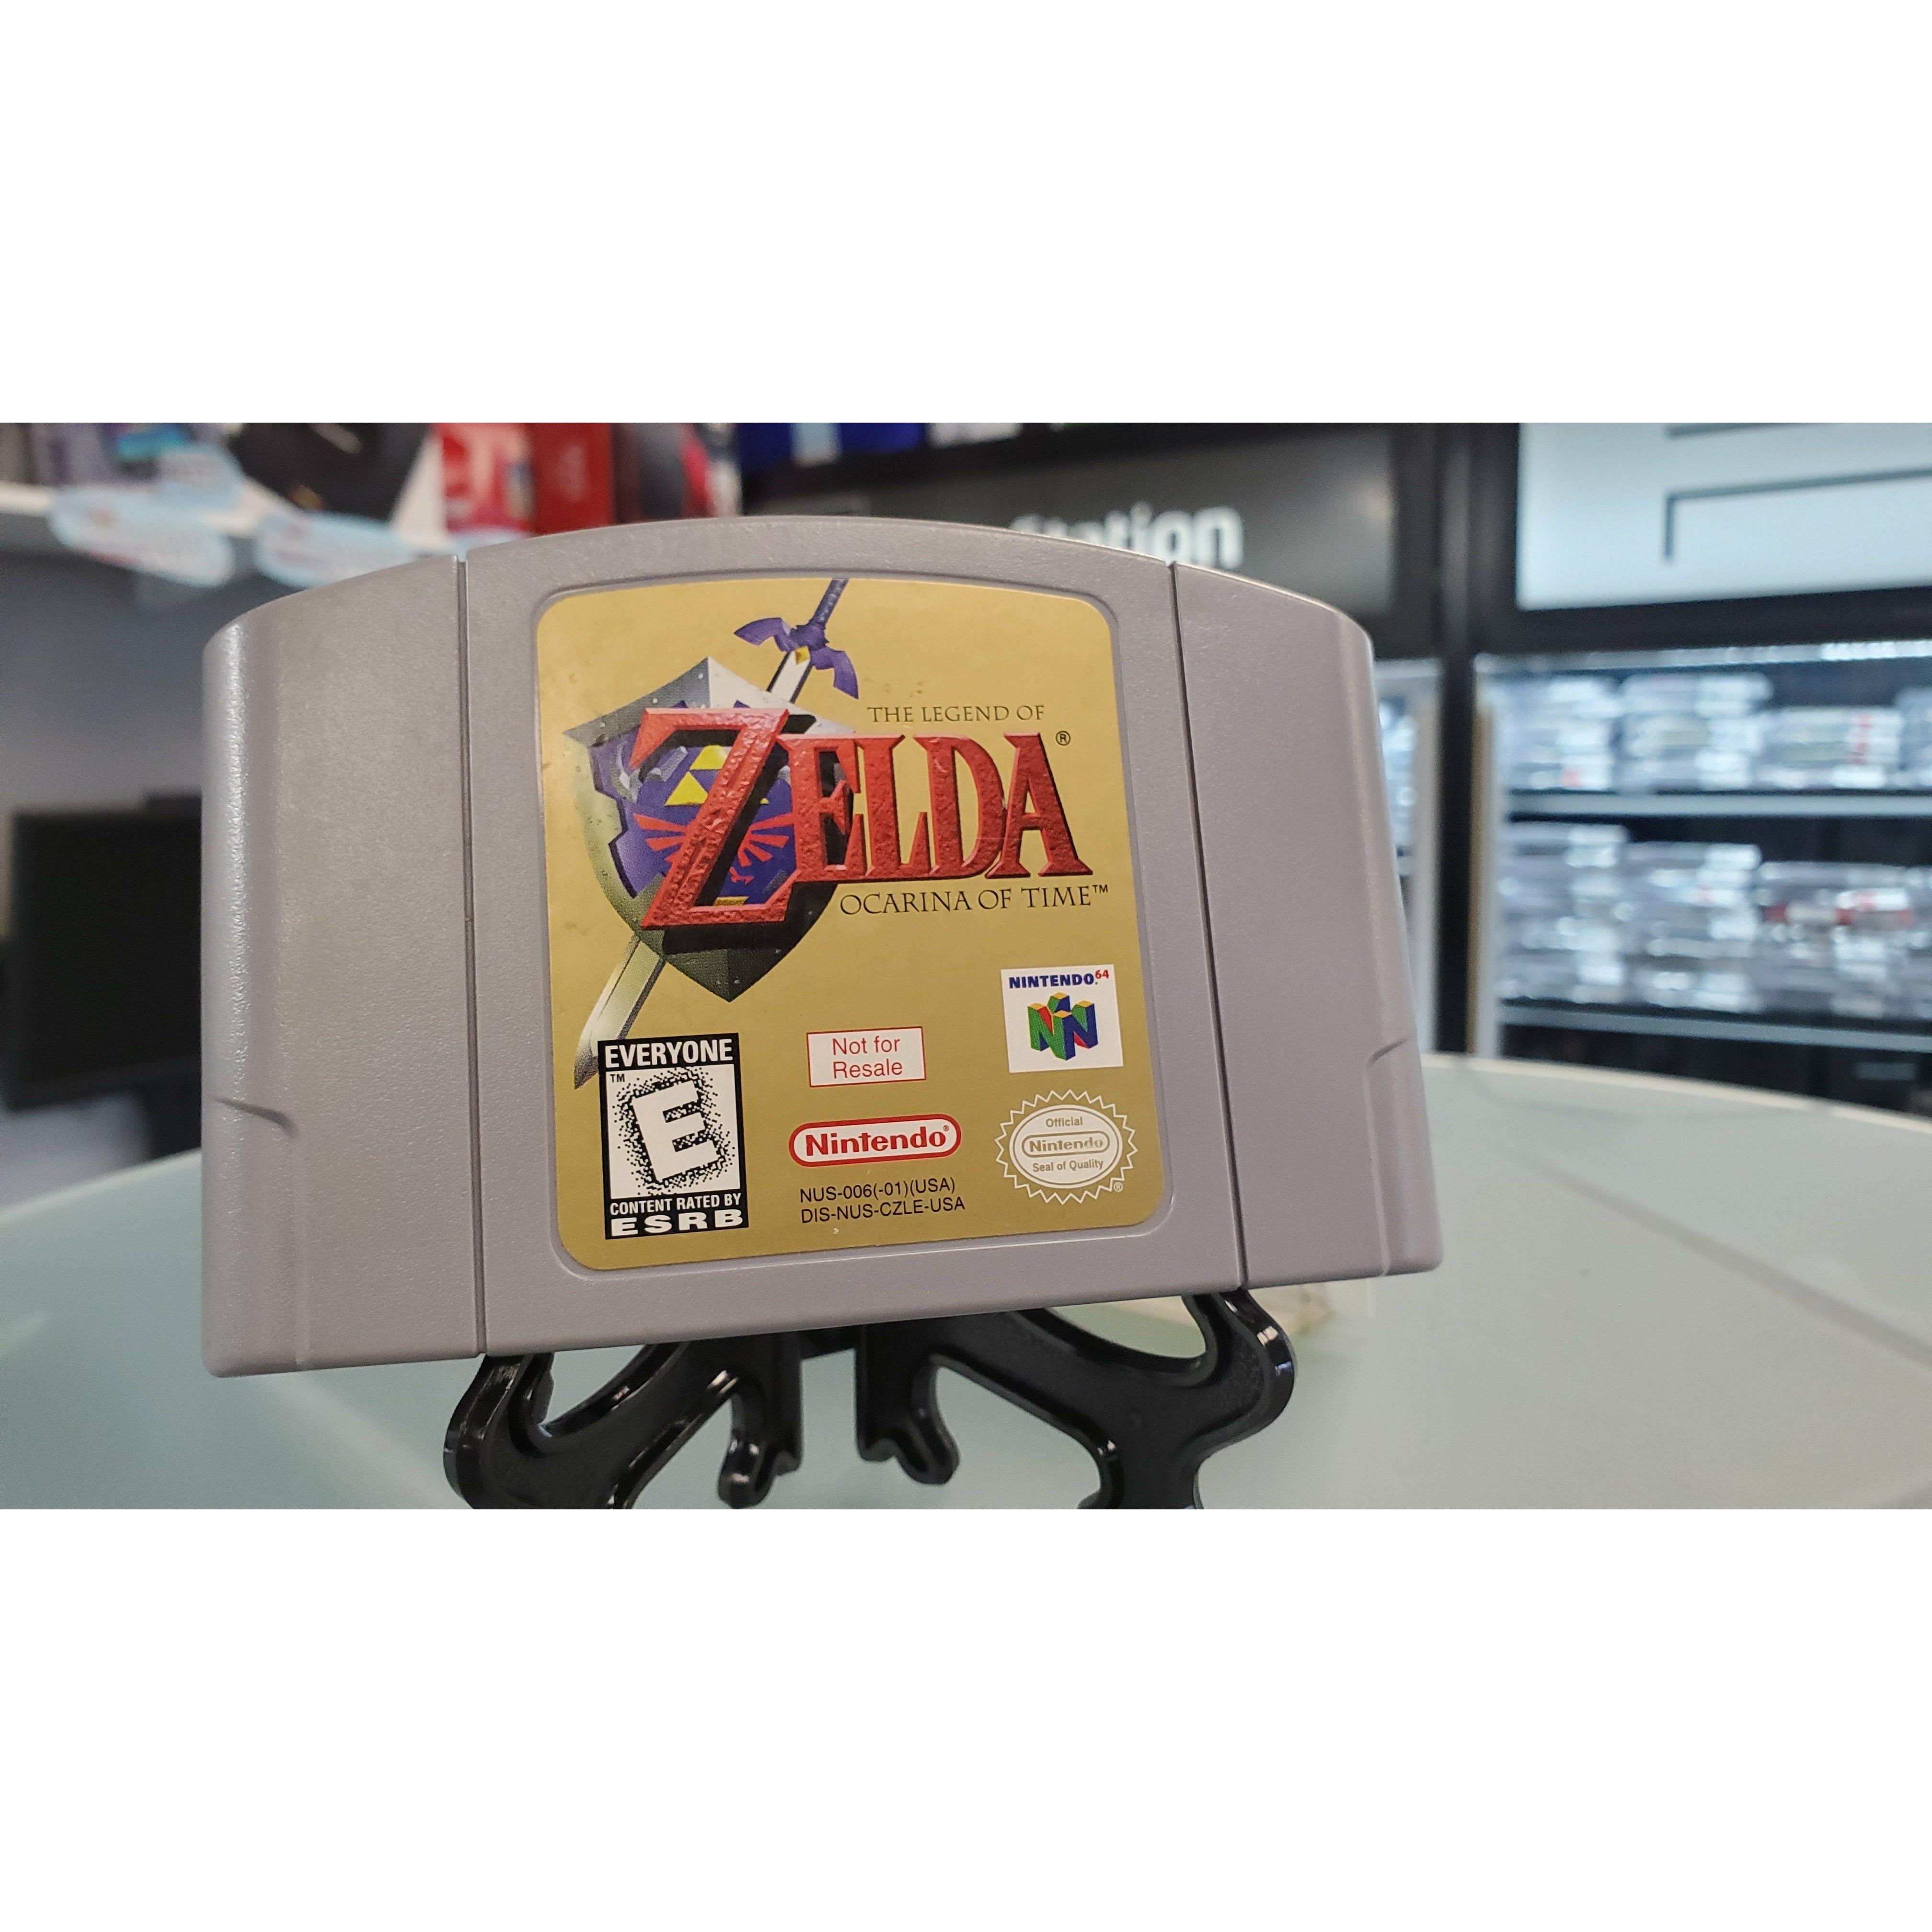 N64 - The Legend of Zelda Ocarina of Time (Not for Resale)(Cartridge Only)